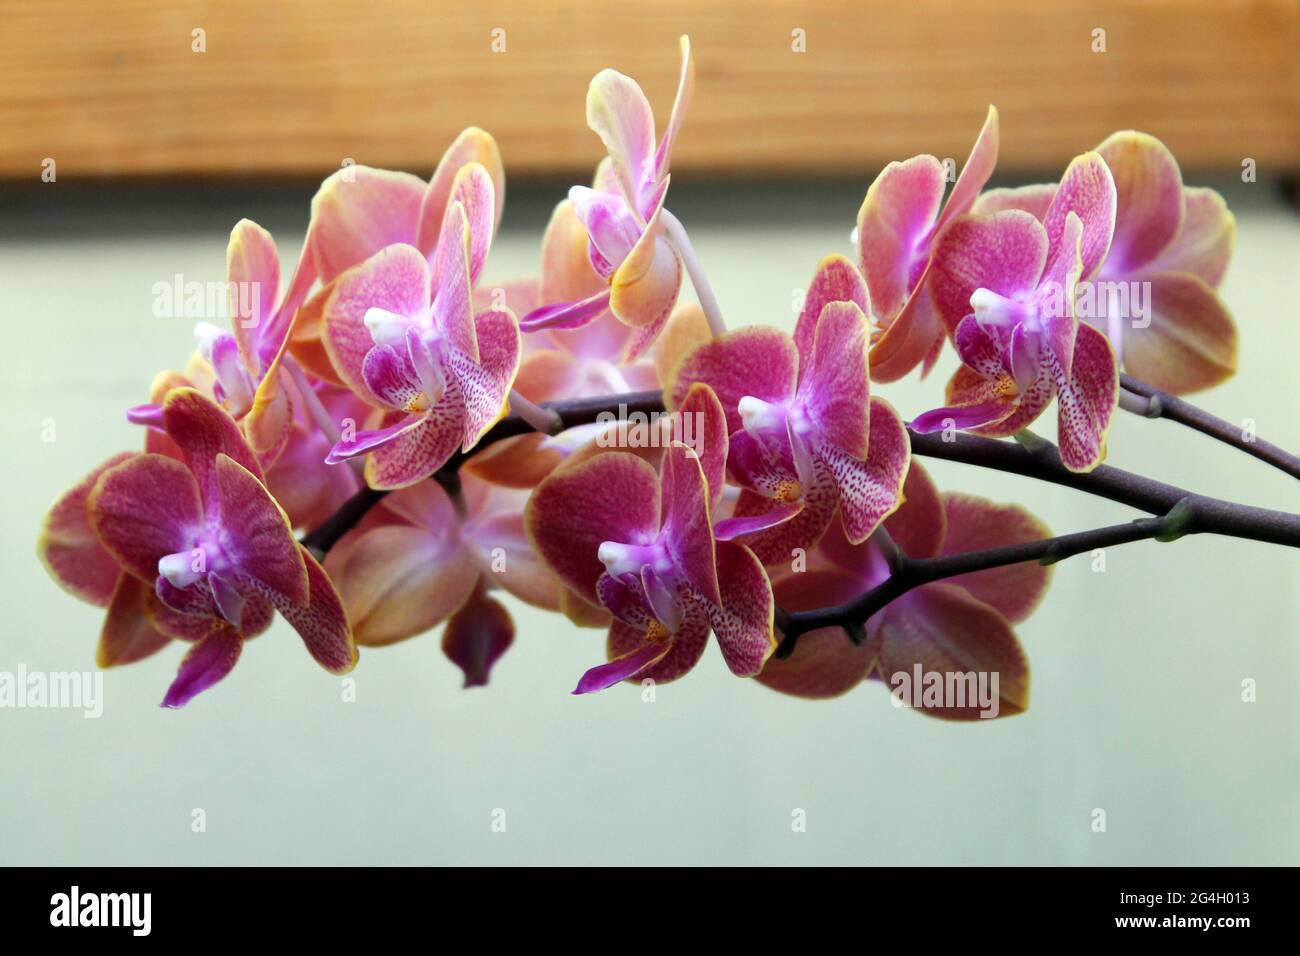 Lots of phalaenopsis orchid flower blooms Stock Photo